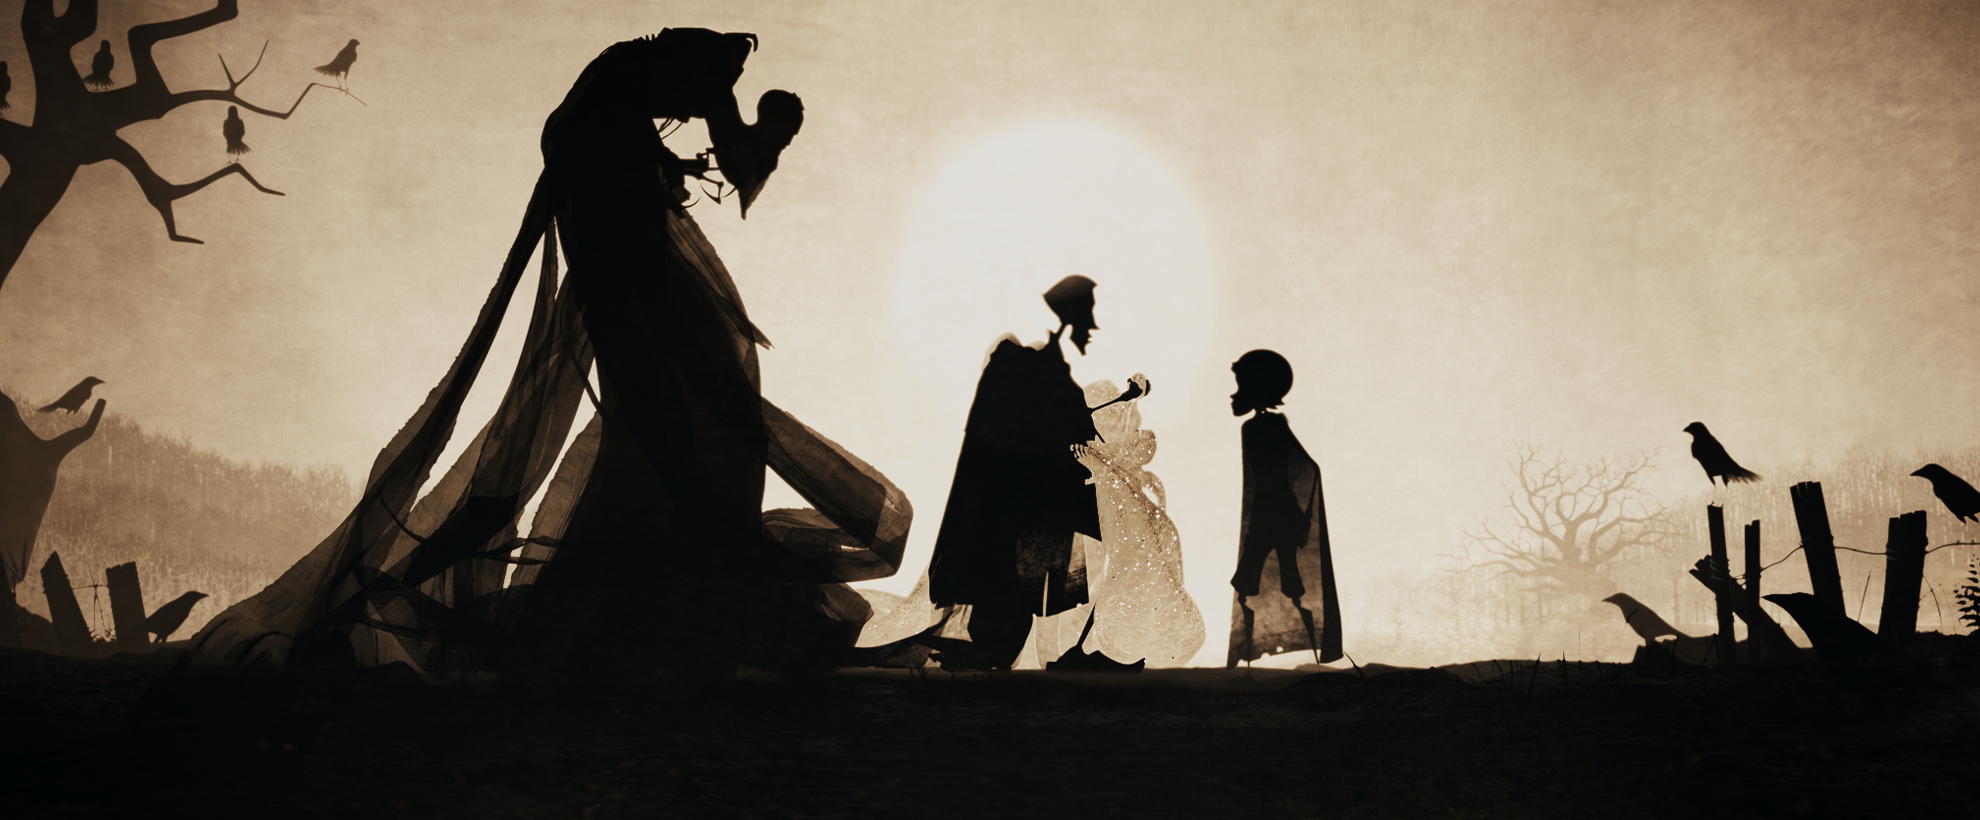 The end of the Three Brothers sequence, where Death watches as the third brother hands the cloak to his son